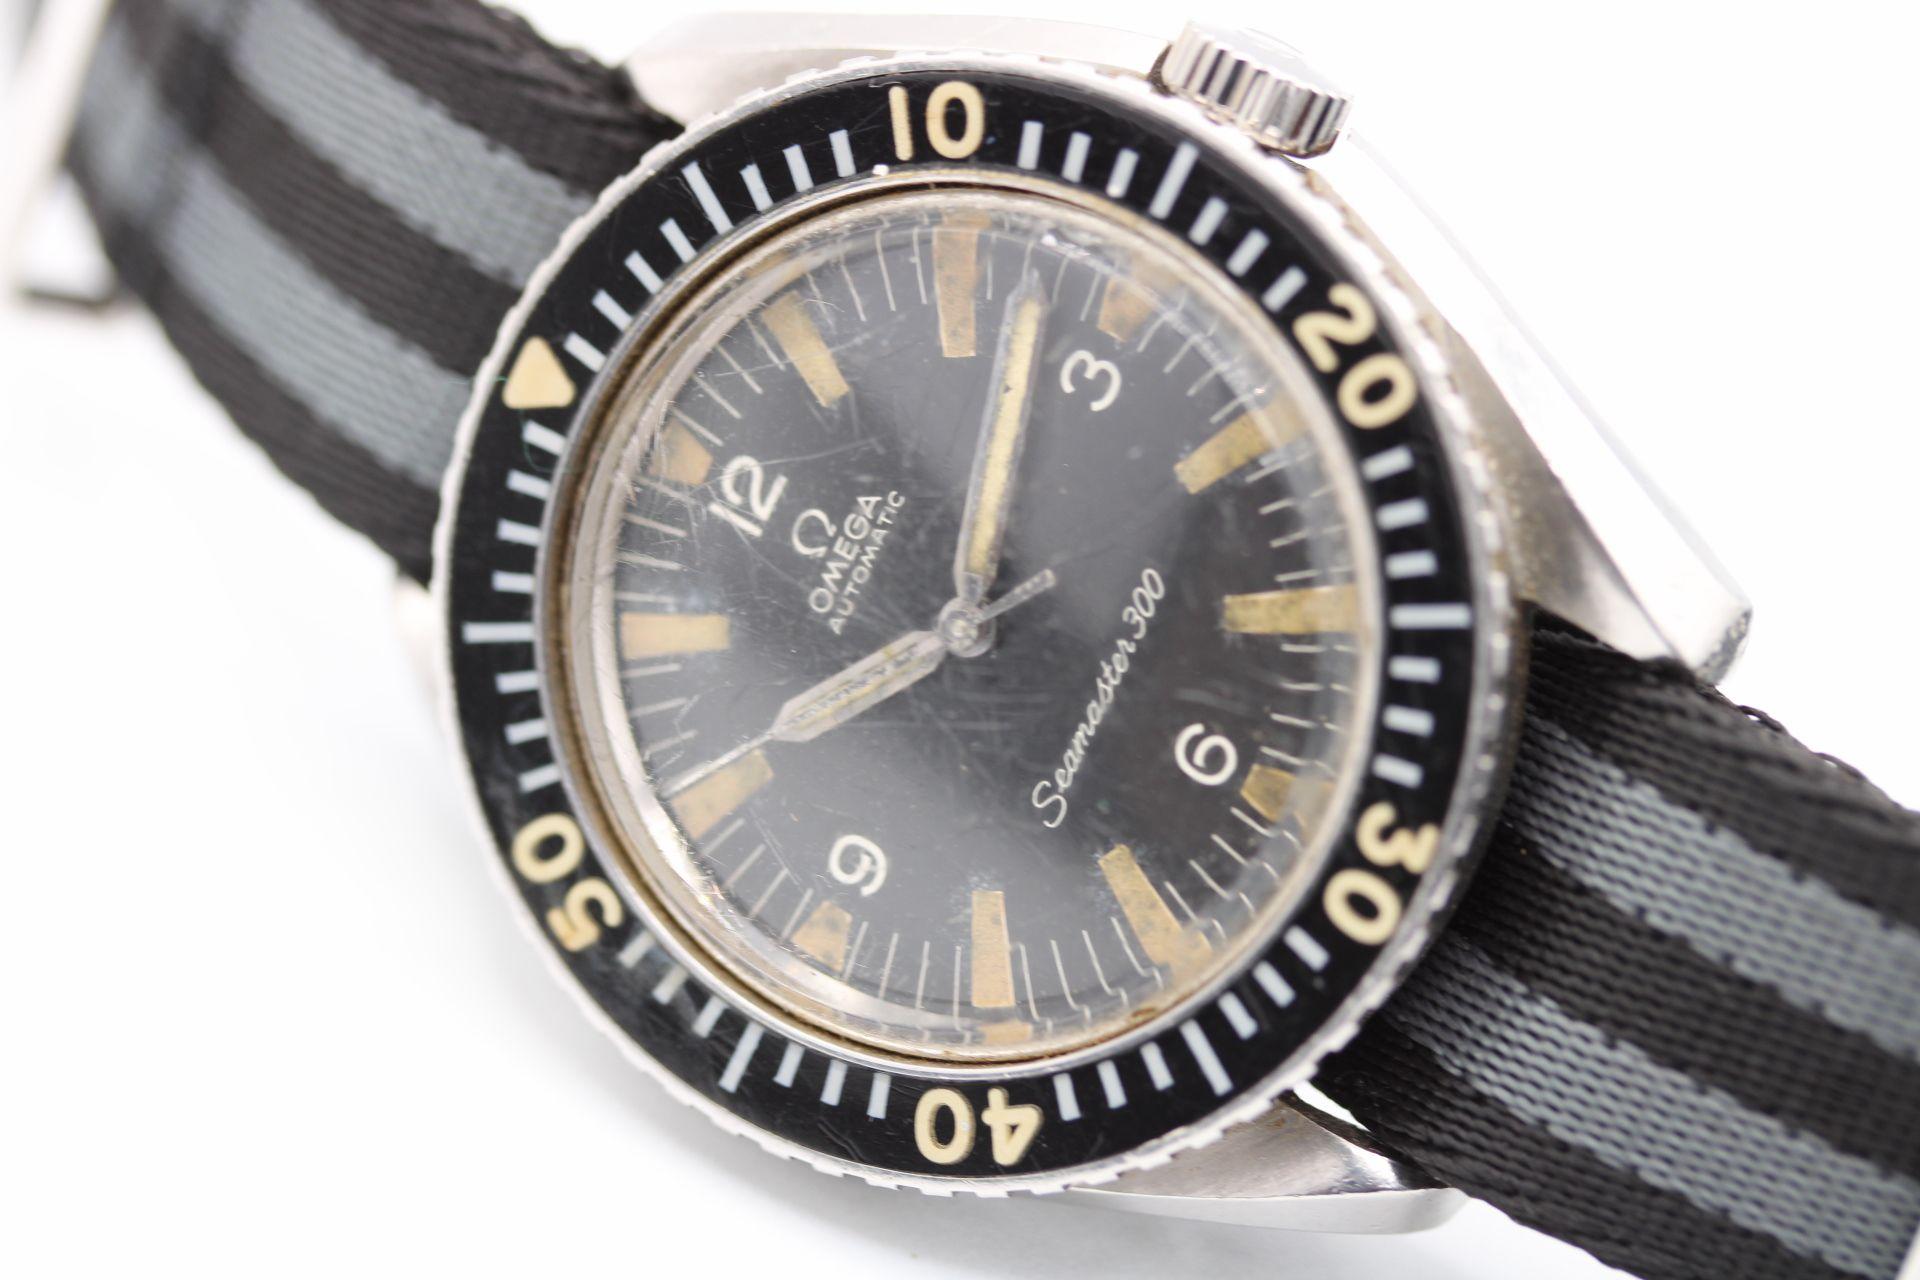 A real treasure and wonderful find, This Omega Seamaster 300 has been worn daily by its last 2 family owners up until the last few s years at which point it was locked away in a drawer. 

We have purposely done very little work to this watch but